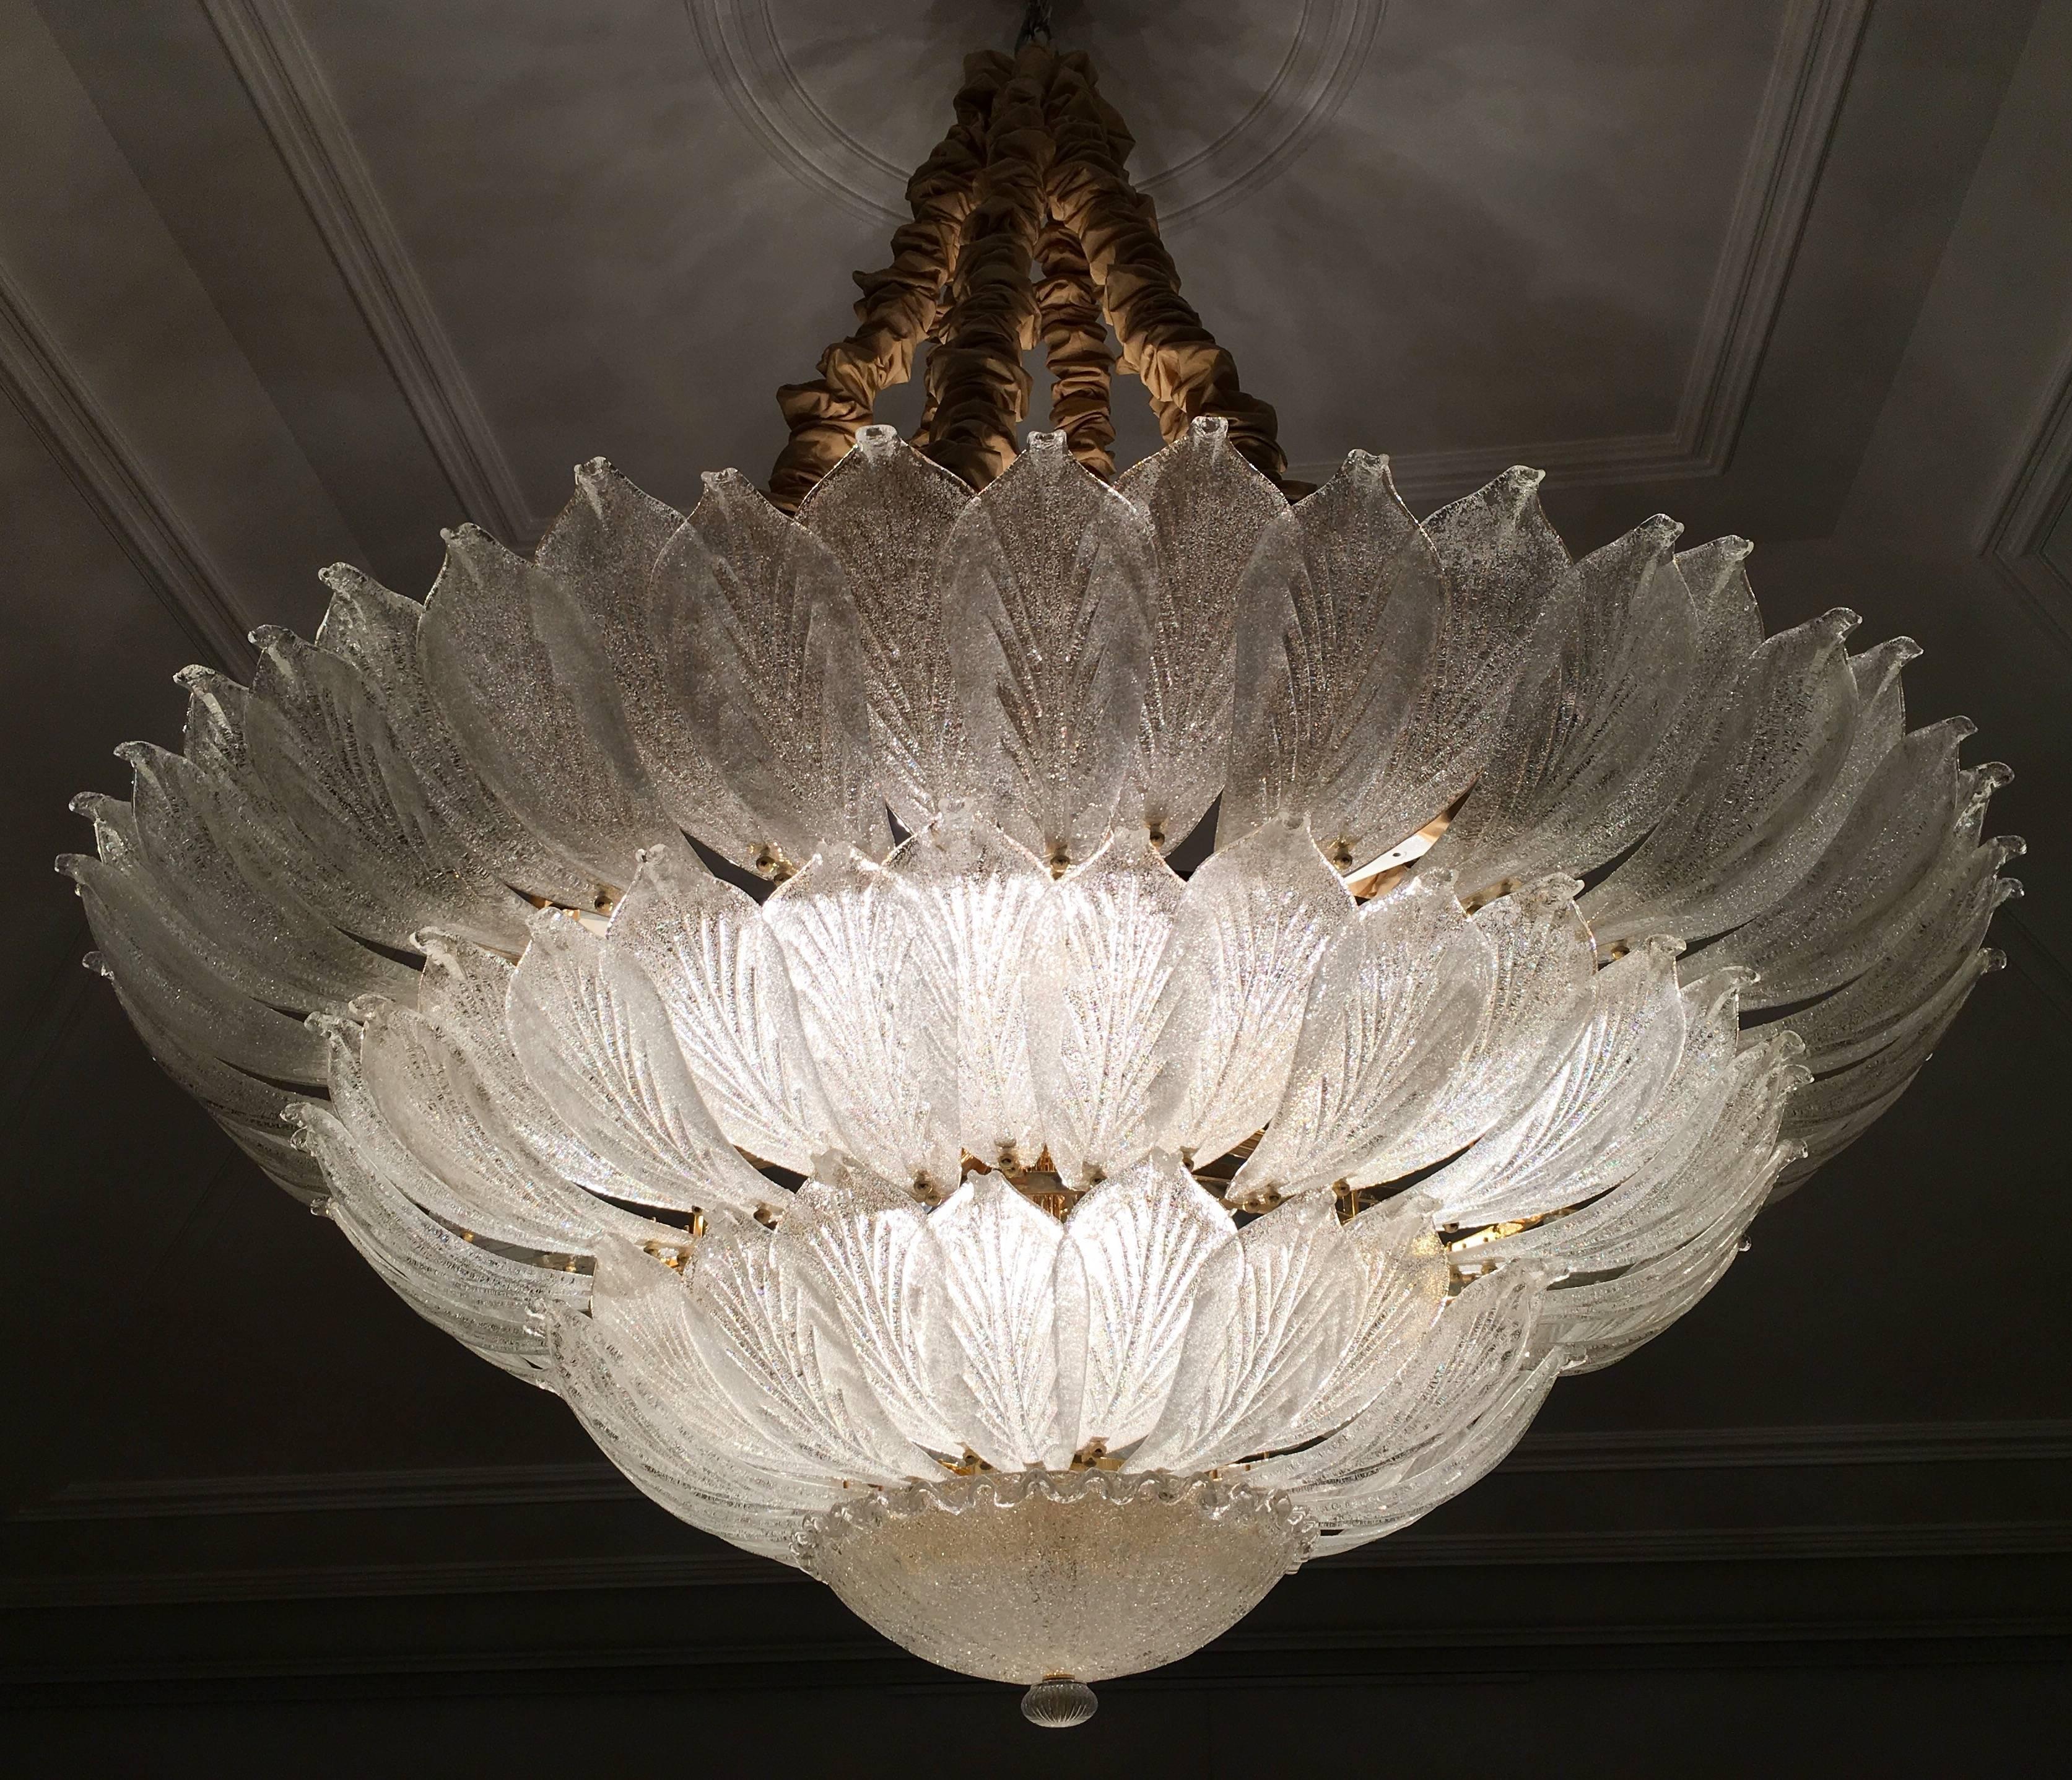 Realized in pure Murano glass, each chandelier consist of an incredible number of leaves. The structure is plated with gold. 18 lights spread a magical light. Measures: Diameter 156 cm, height 58 cm + chain. Also available are three ceiling lights